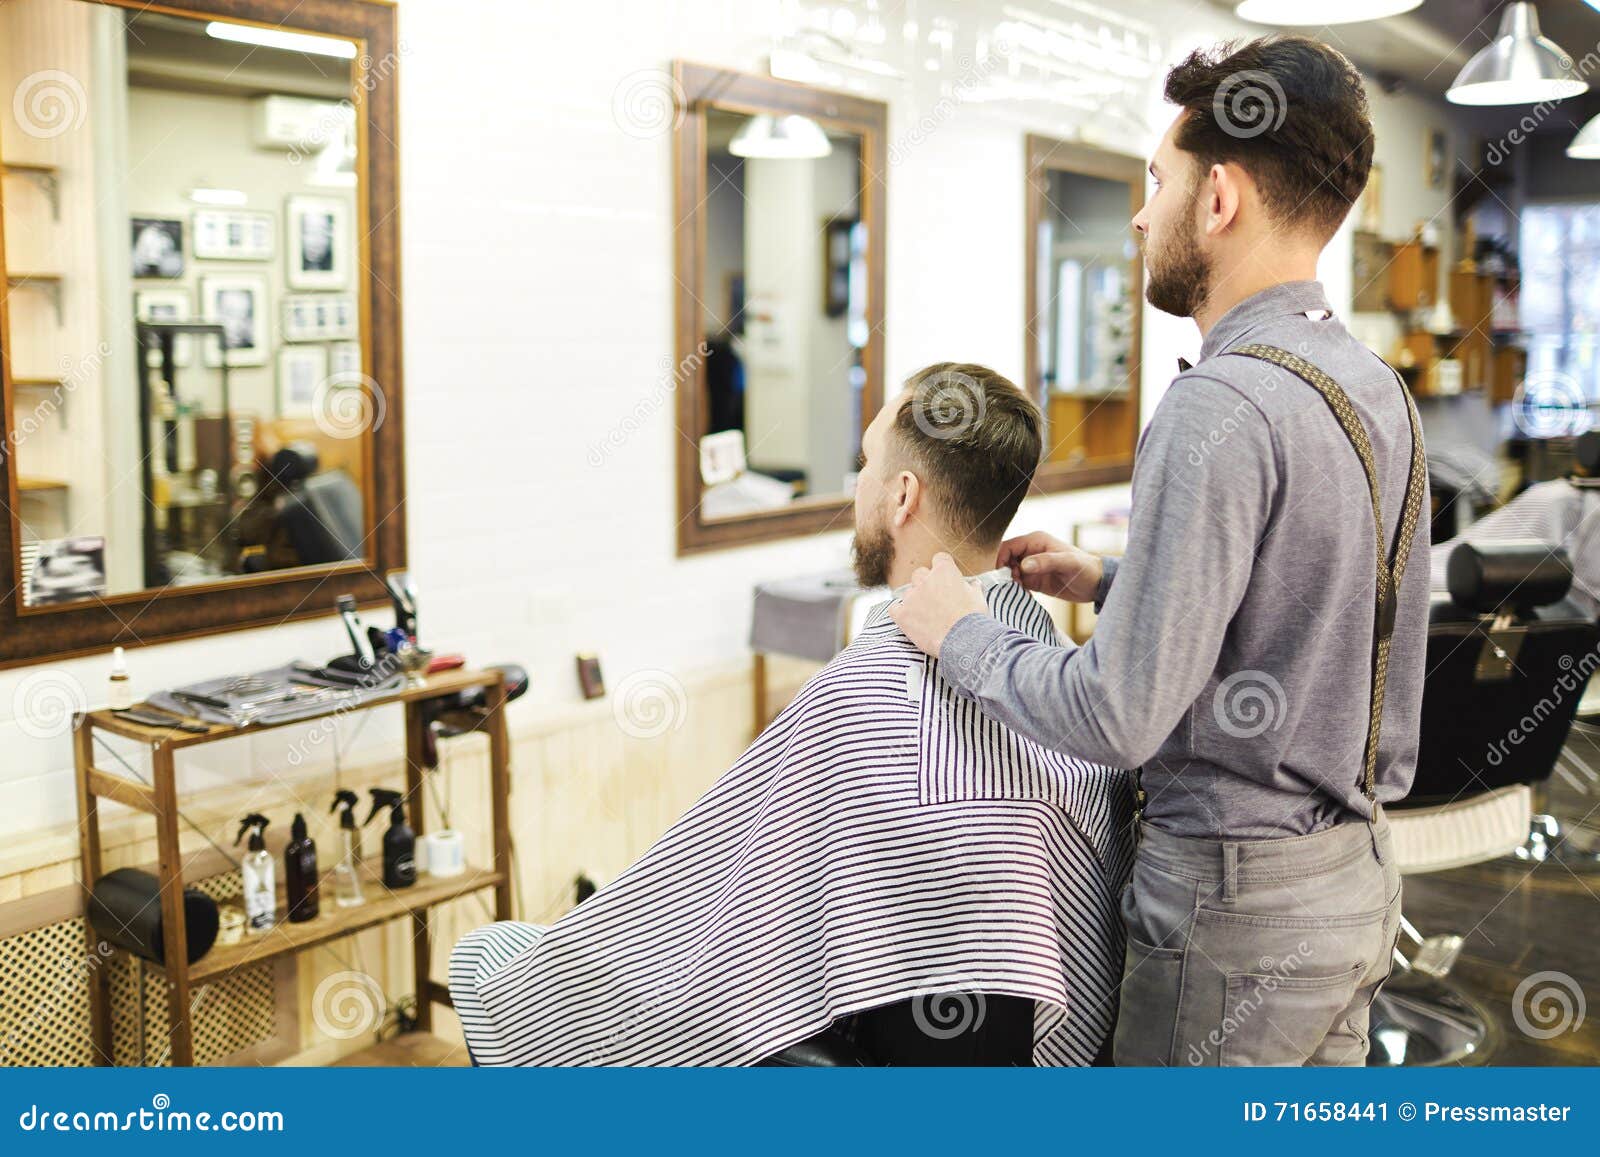 Man in babershop stock image. Image of lifestyle, hairstylist - 71658441